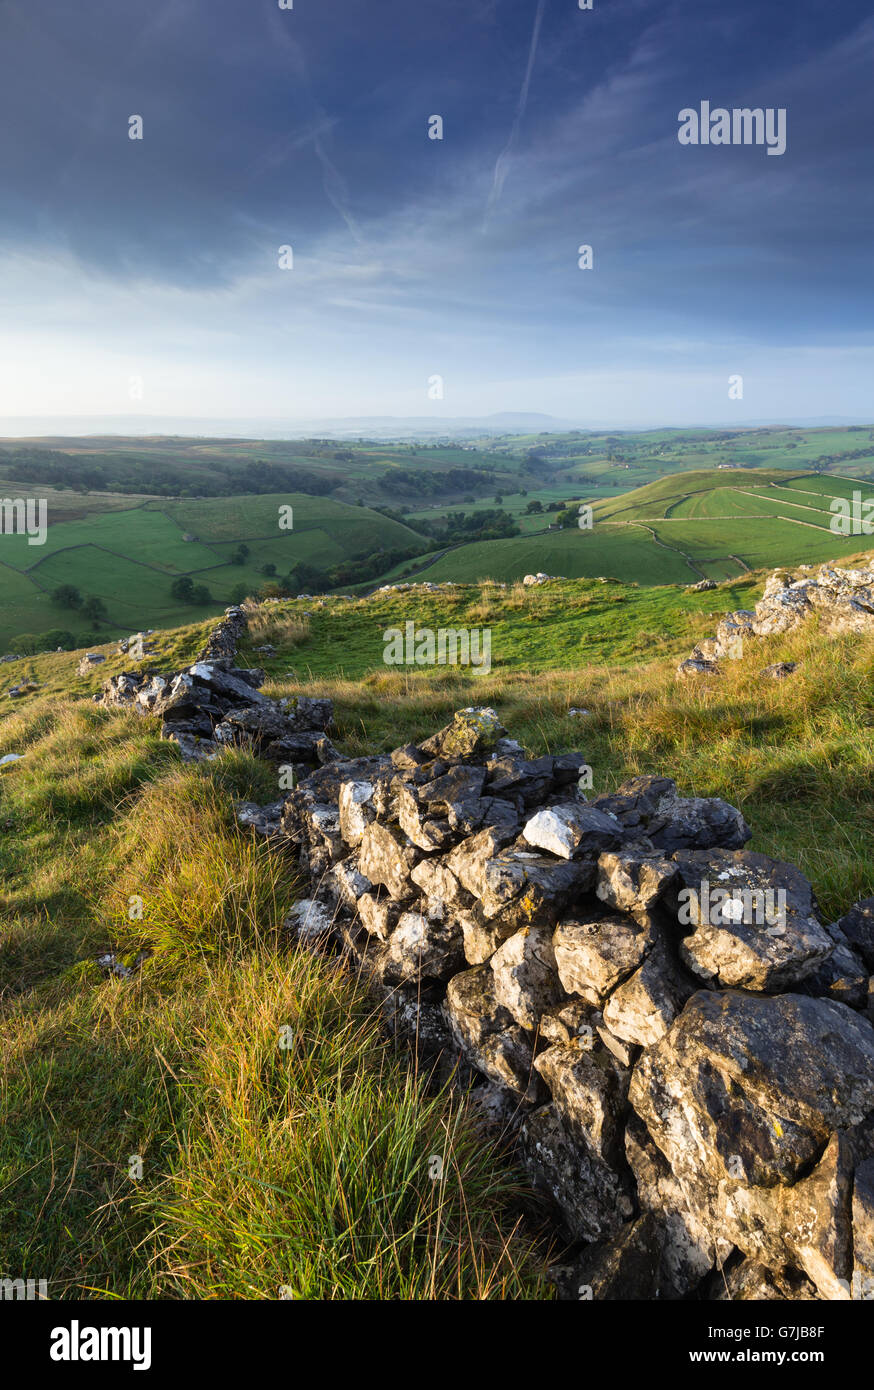 Long distance early morning view near Malham, Yorkshire Dales National Park, England, UK Stock Photo